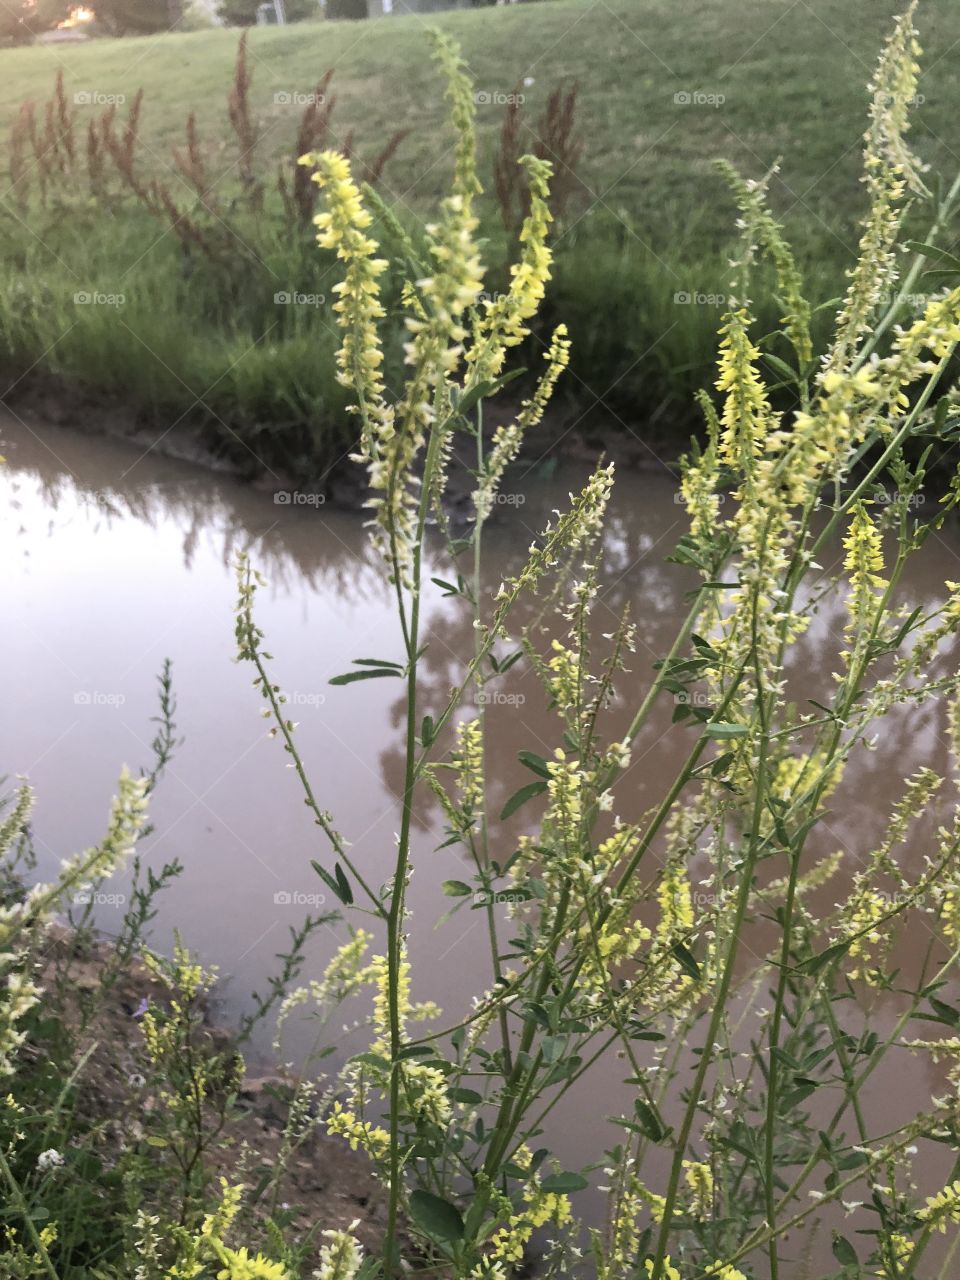 The wildflowers growing by the creek at Oklahoma University